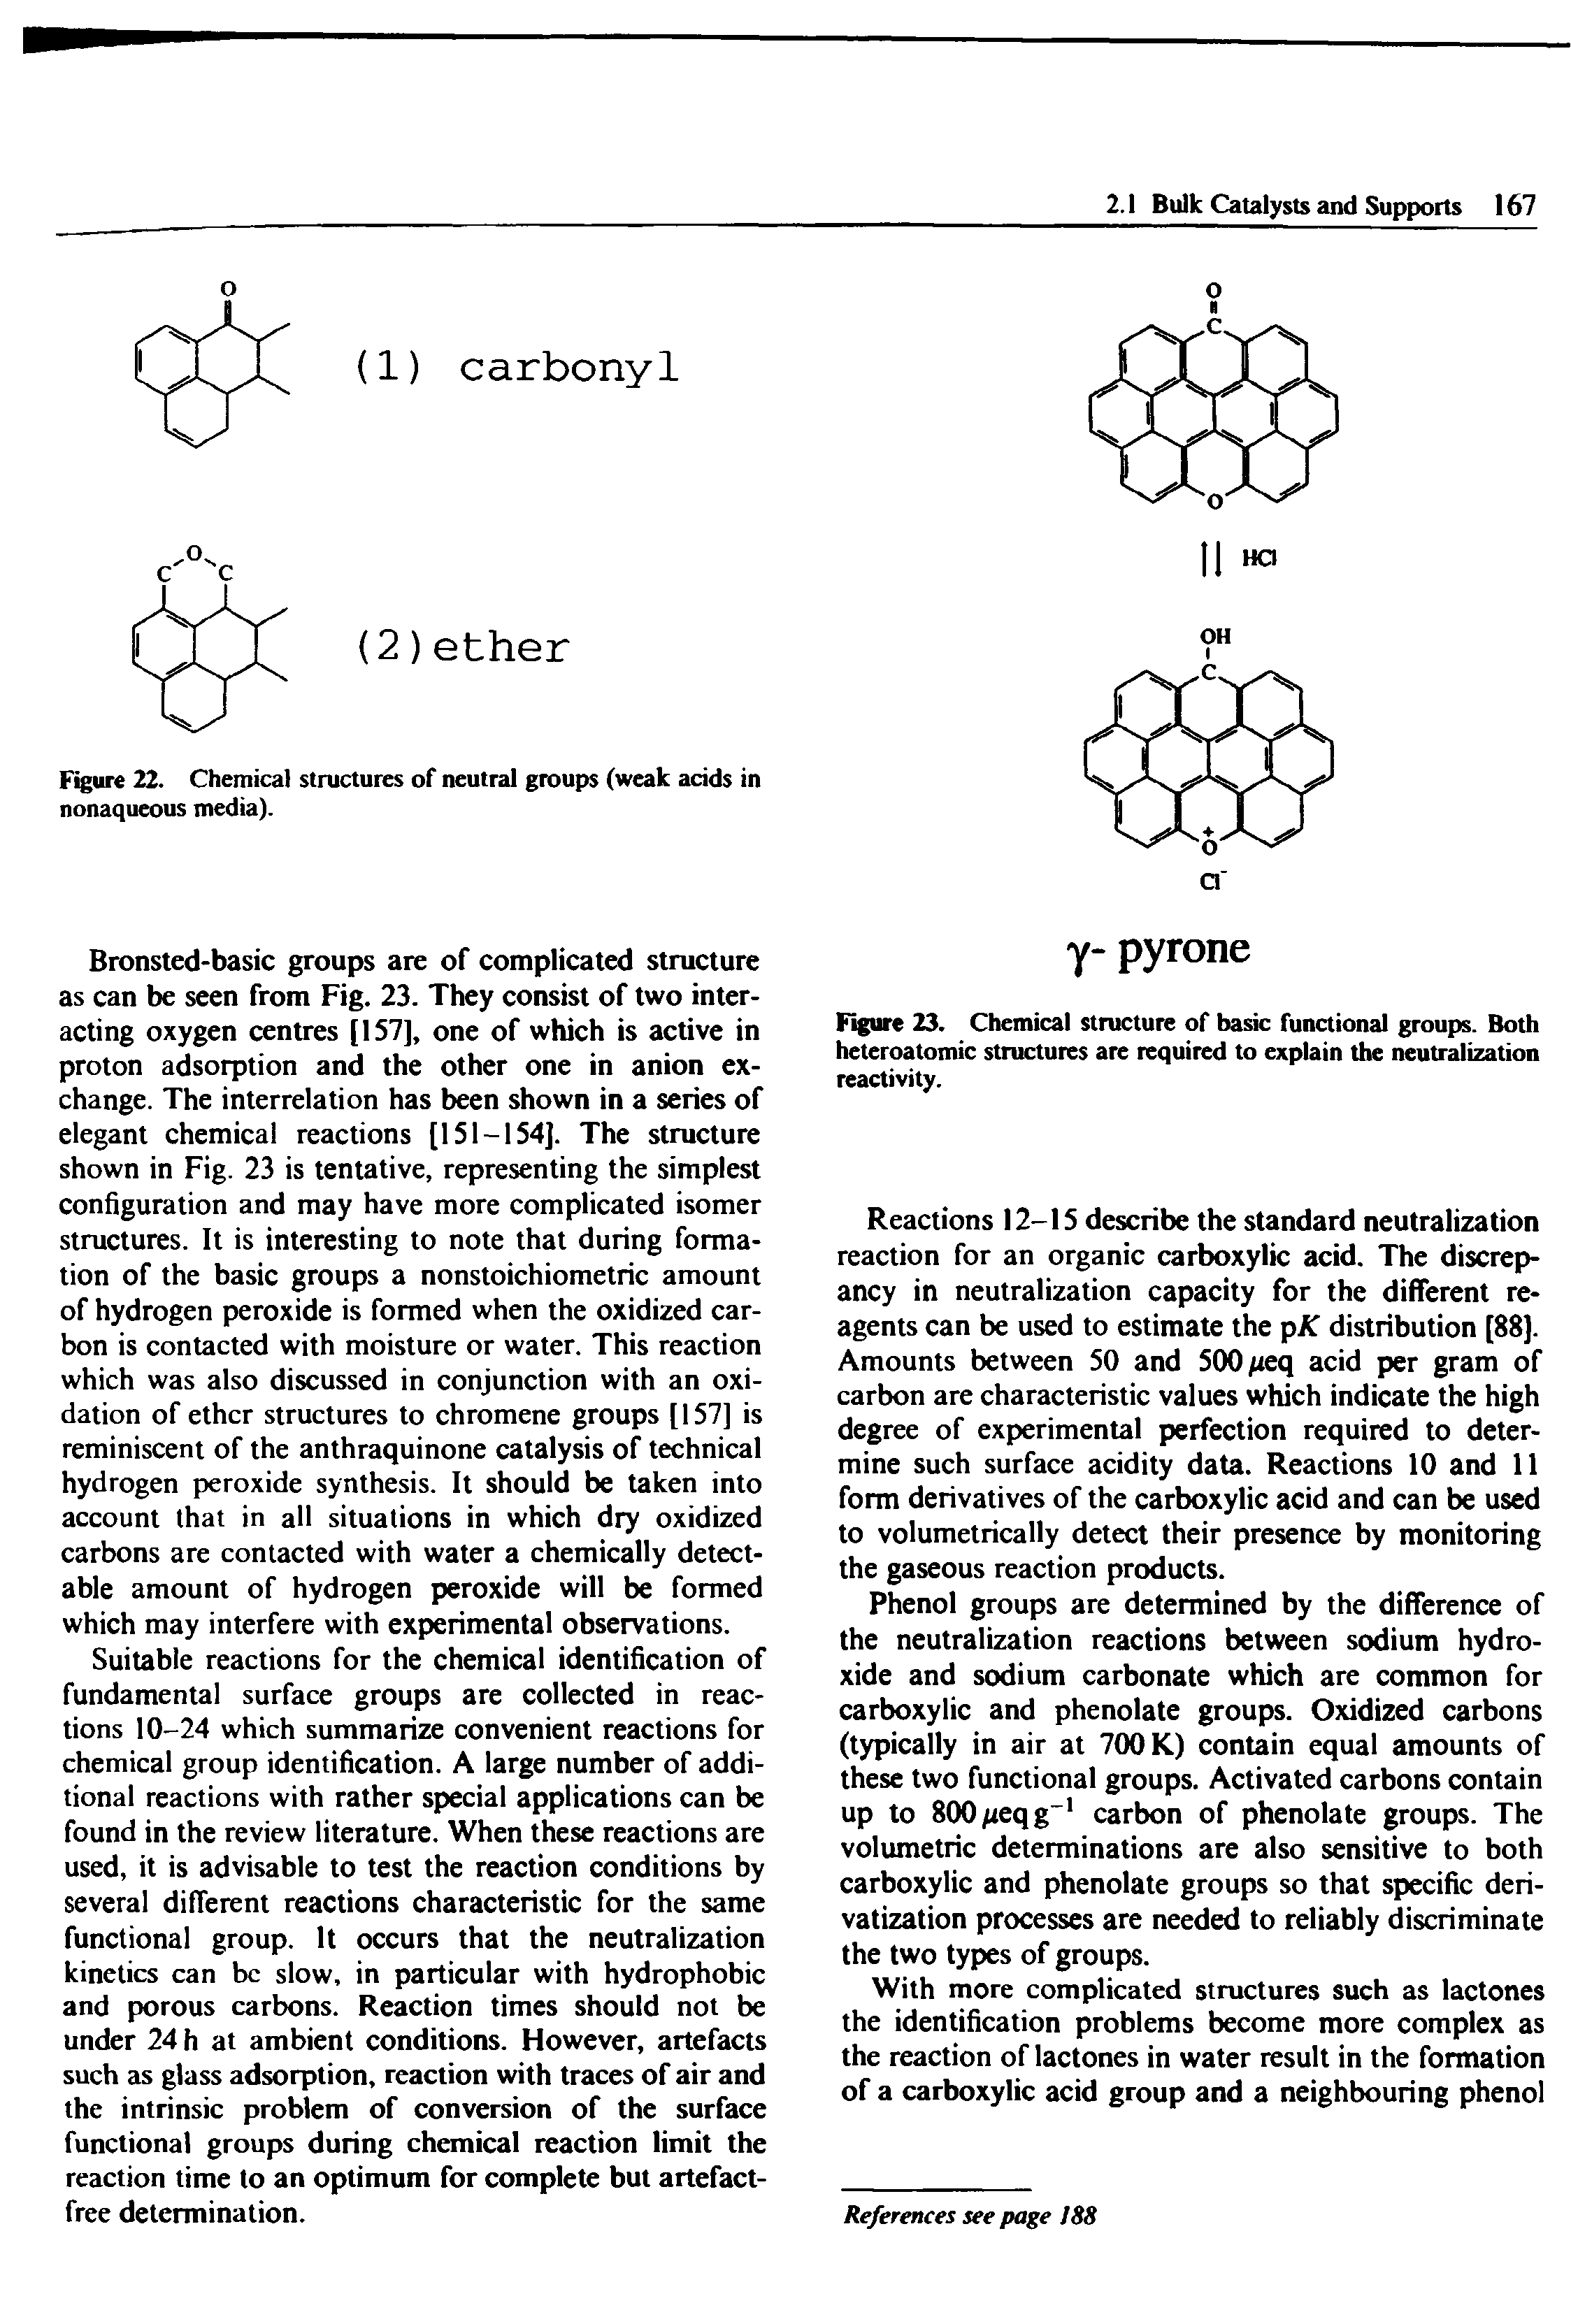 Figure 23. Chemical structure of basic functional groups. Both heteroatomic structures are required to explain the neutralization reactivity.